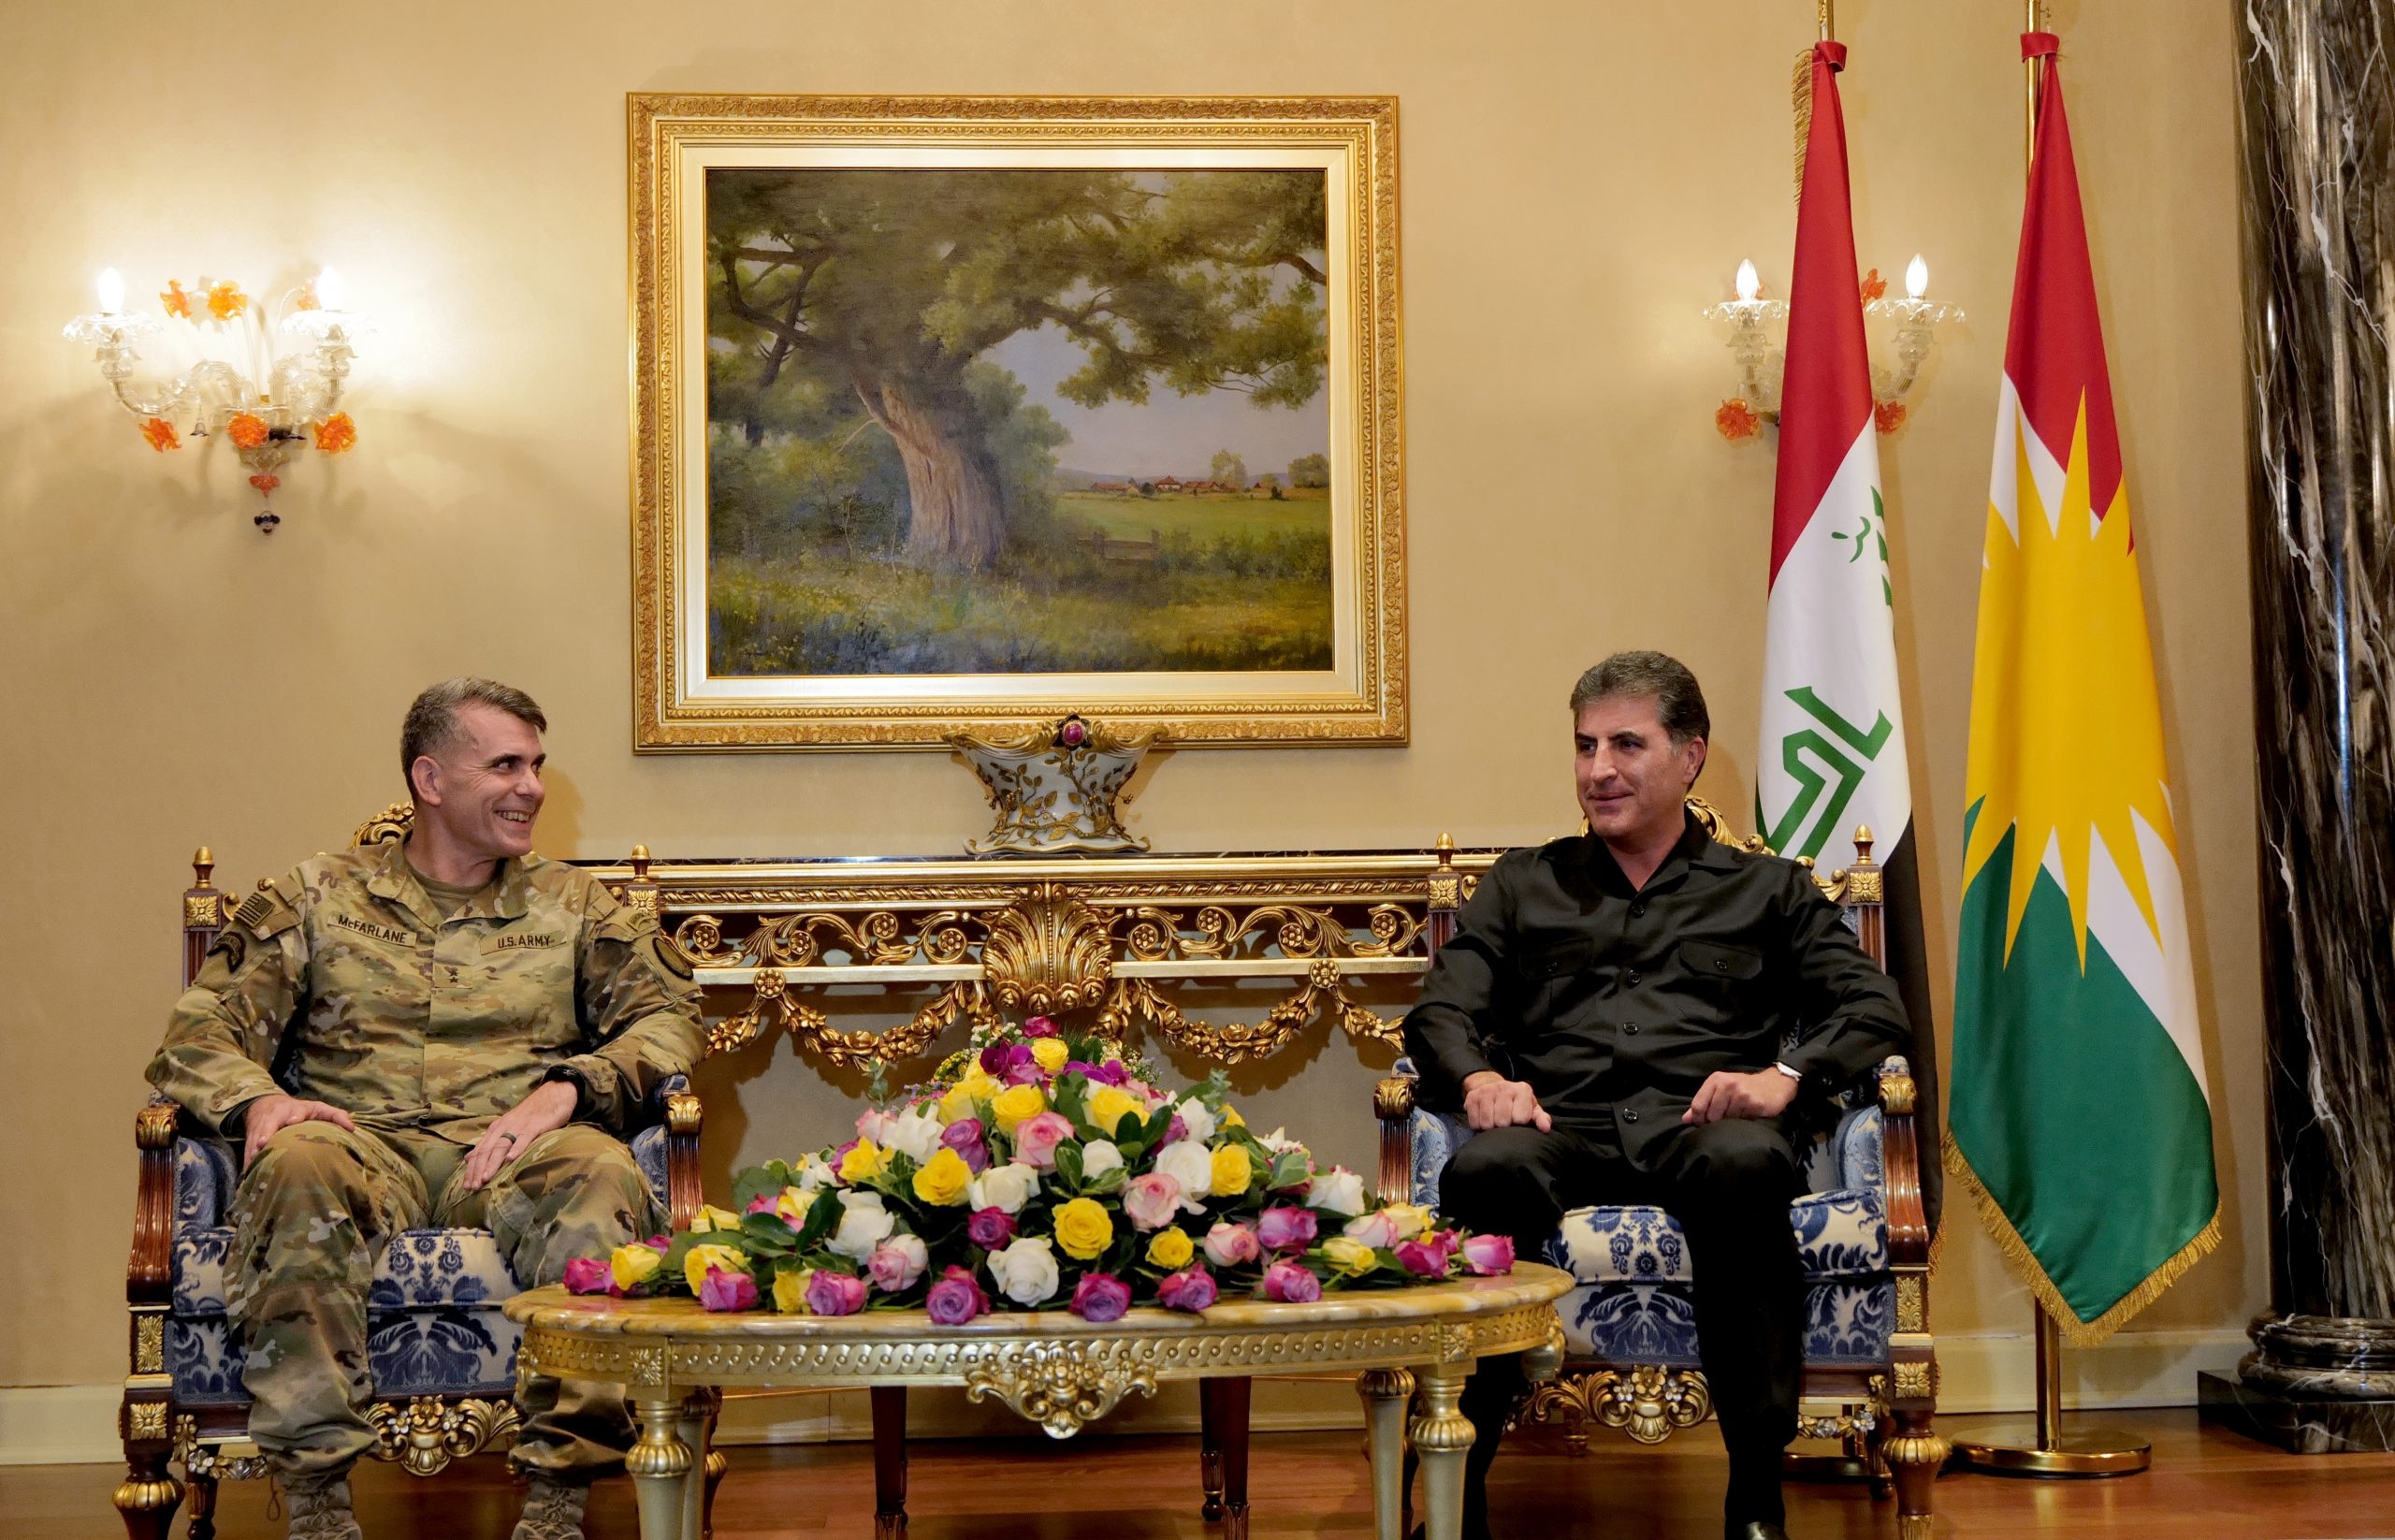 President Nechirvan Barzani receives a high-level military delegation of the Coalition Forces